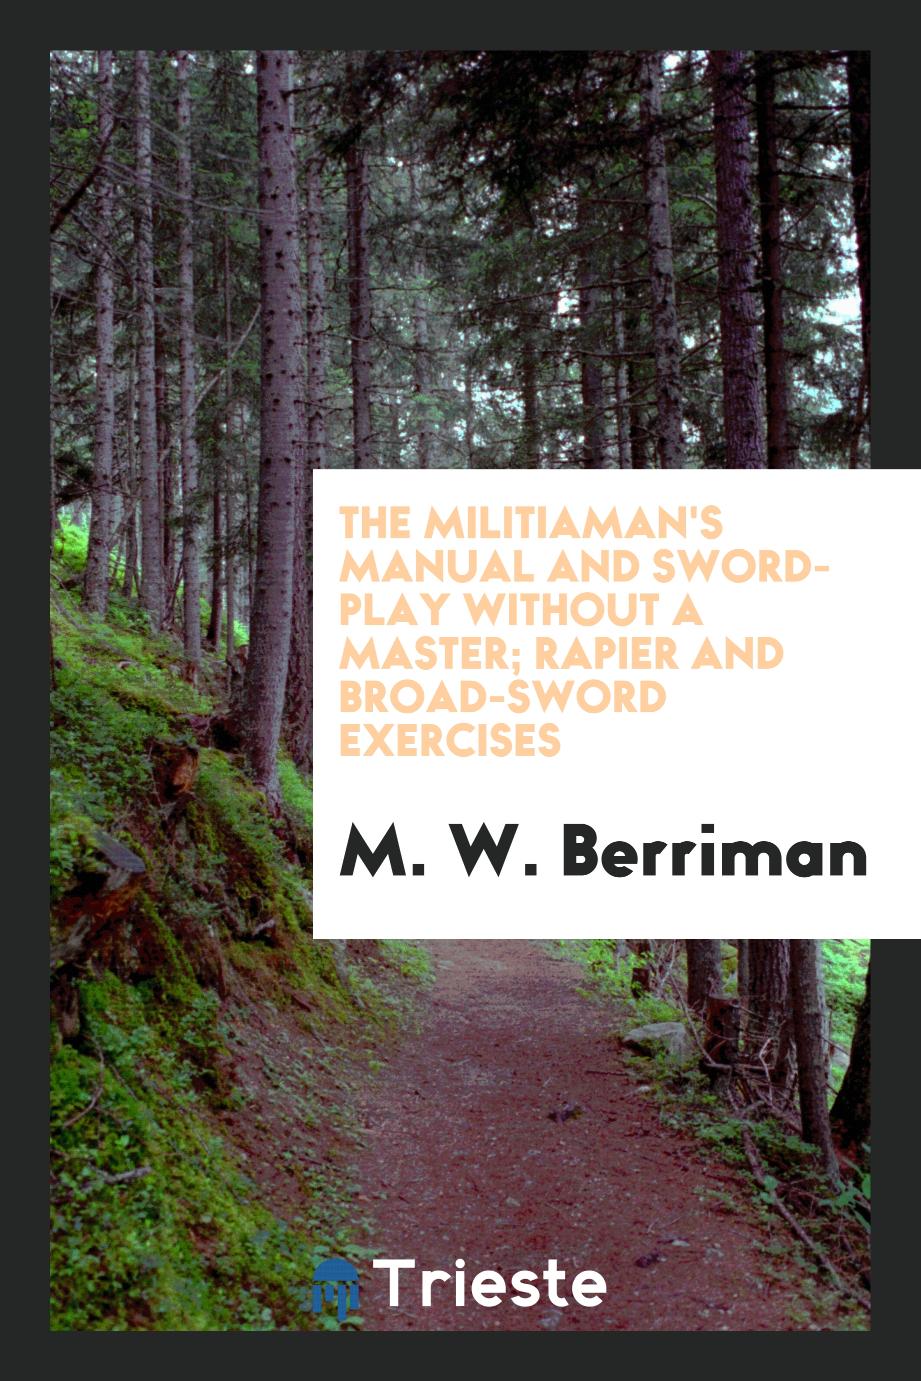 The Militiaman's Manual And Sword-Play without a Master; Rapier and Broad-Sword Exercises